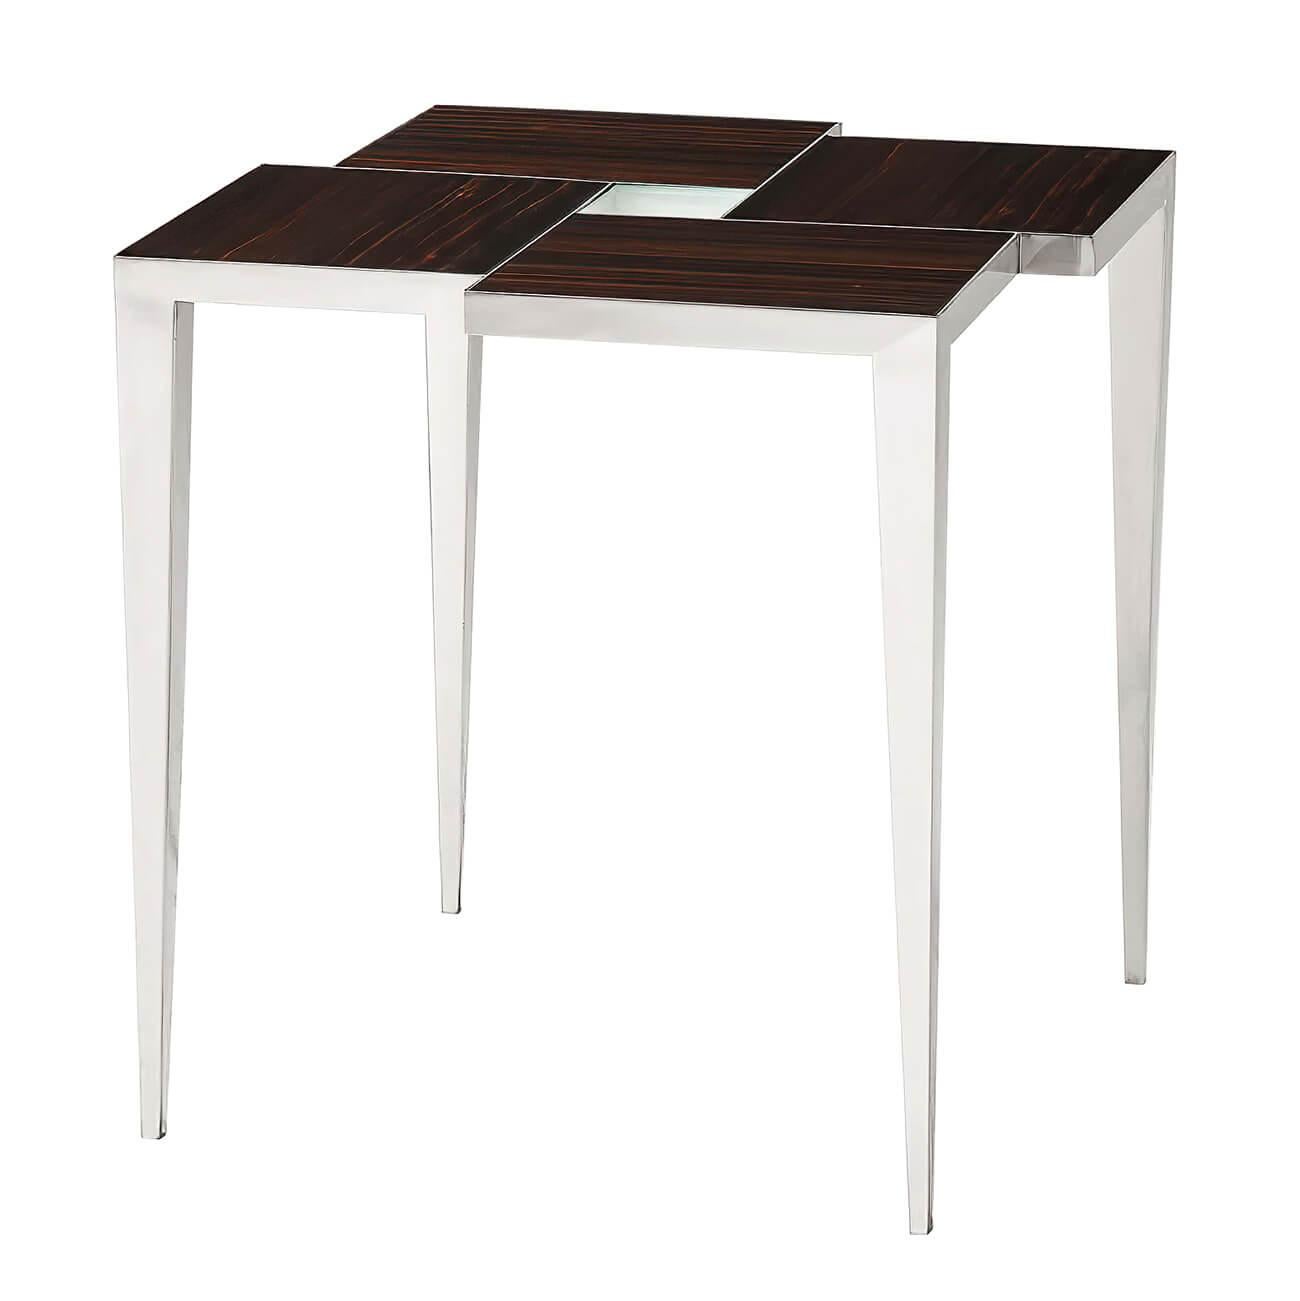 A modern stainless steel side table with offset Amara veneered top sections on a polished stainless steel base with square tapering legs.

Dimensions: 24